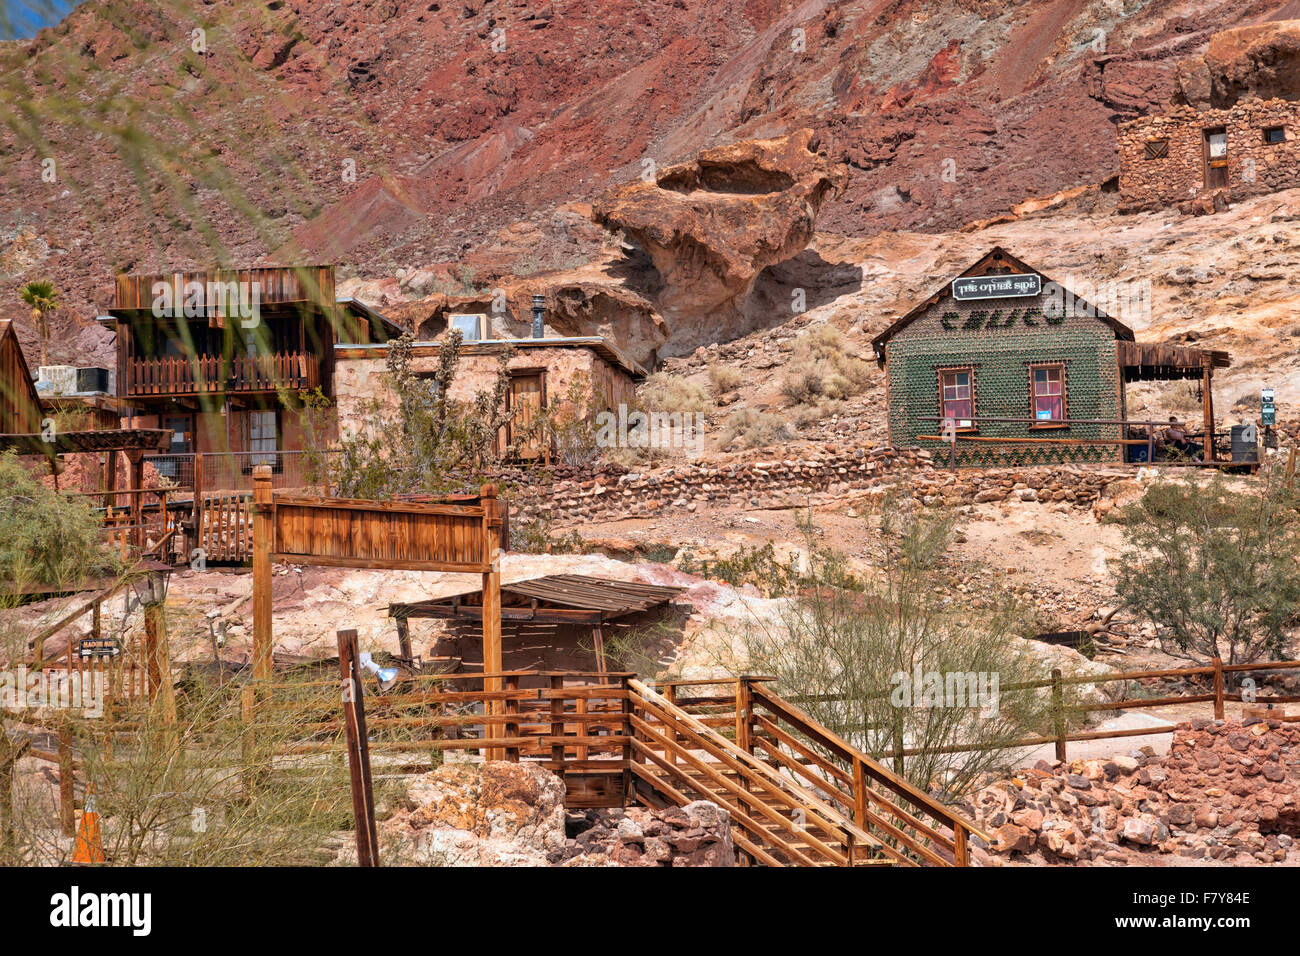 Ghost town in the Nevada desert. Historical abandoned mining town now tourist attraction near Las Vegas, old Western town. Stock Photo